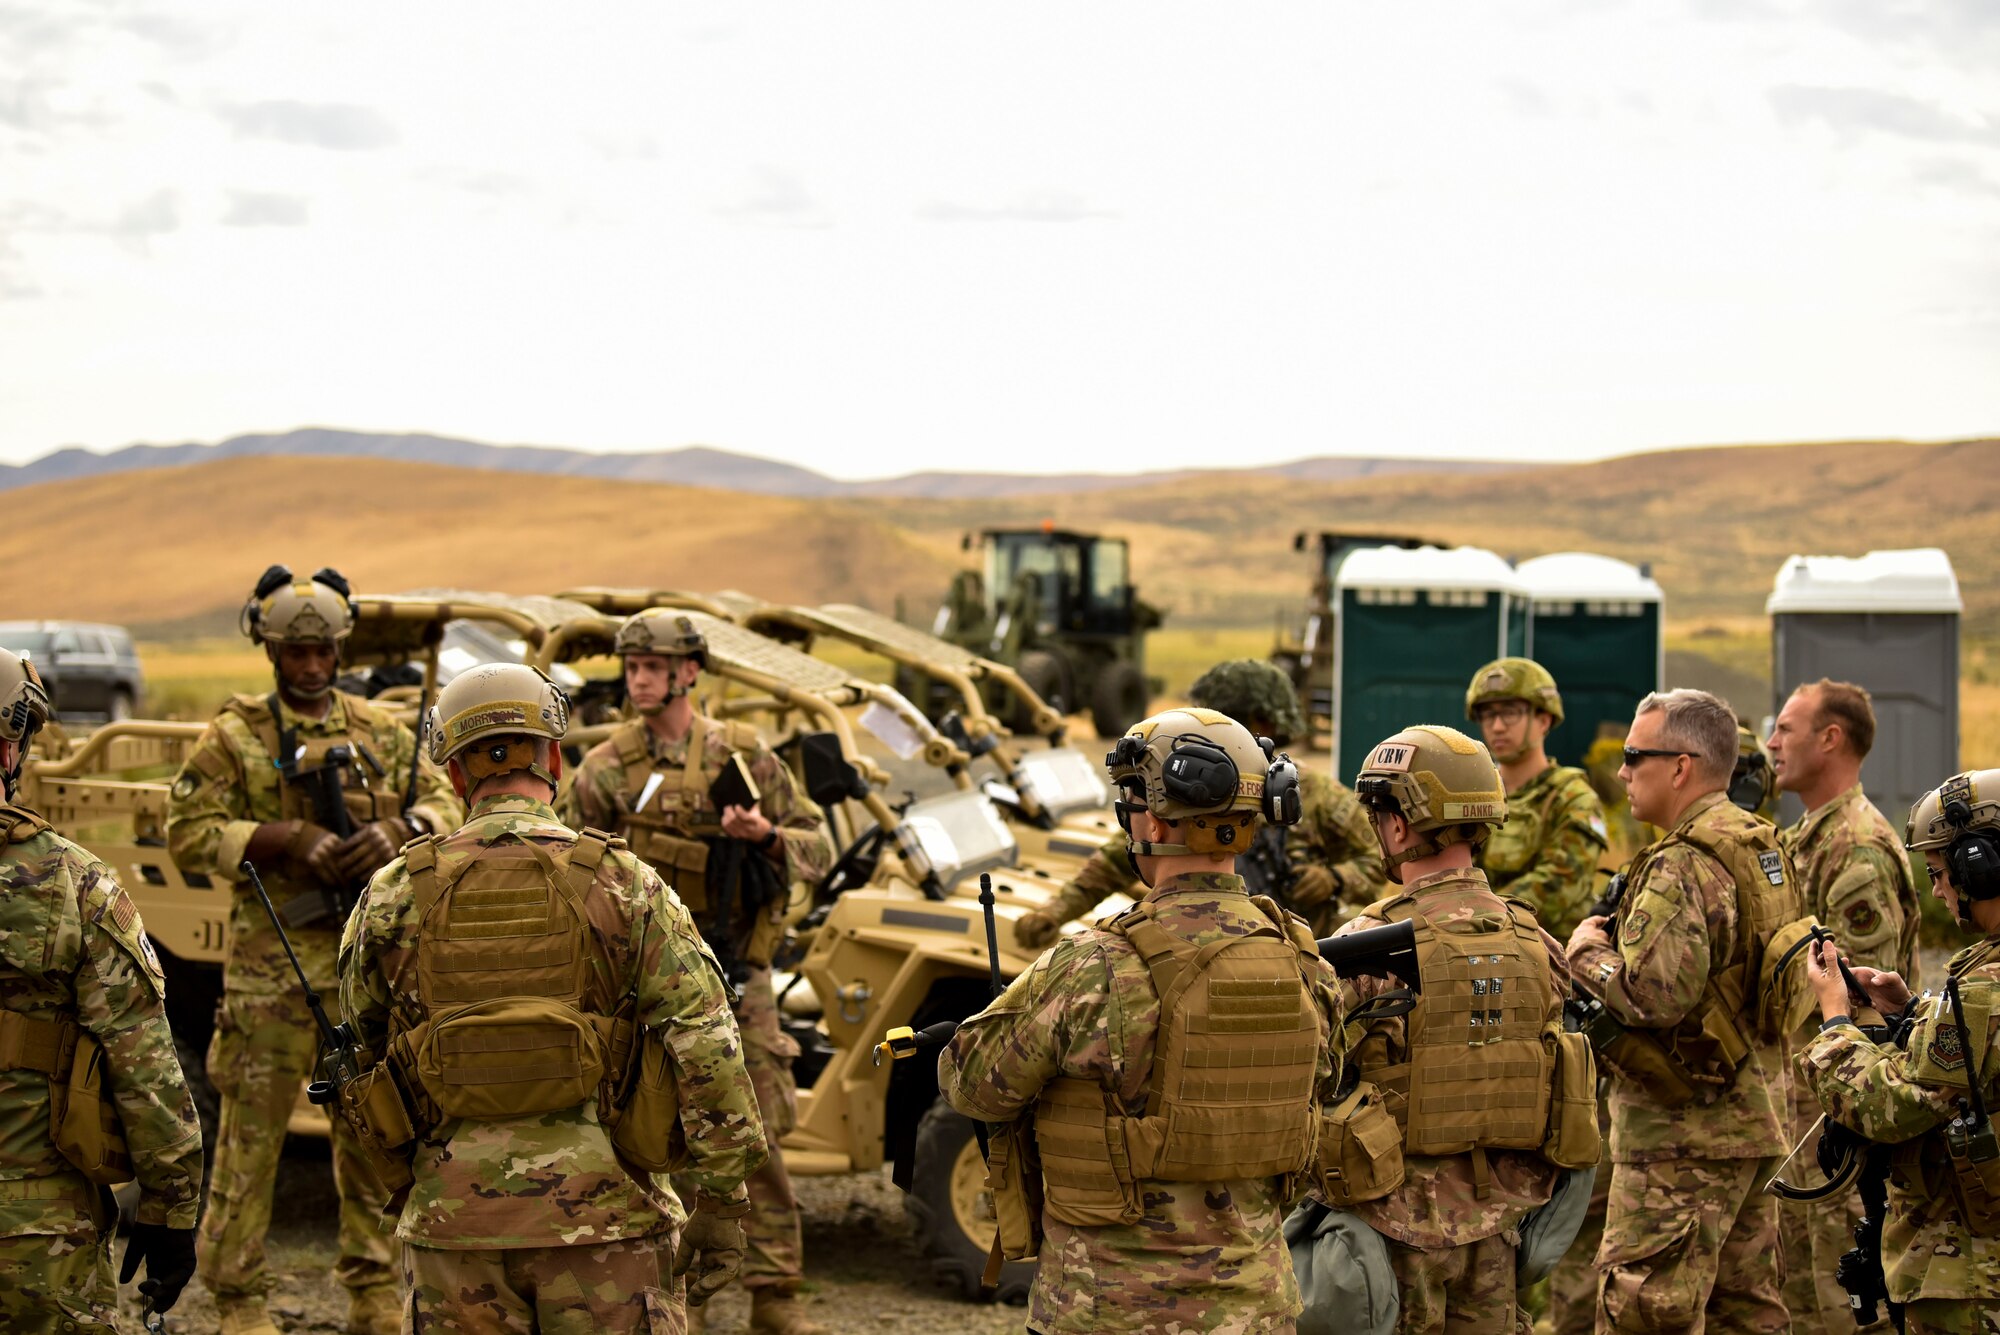 U.S. Air Force Airmen, U.S. Army Soldiers and Australian Royal Air Force Airmen plan how to proceed with the next stage of their Joint Forcible Entry operation during Air Mobility Command’s Mobility Guardian exercise.